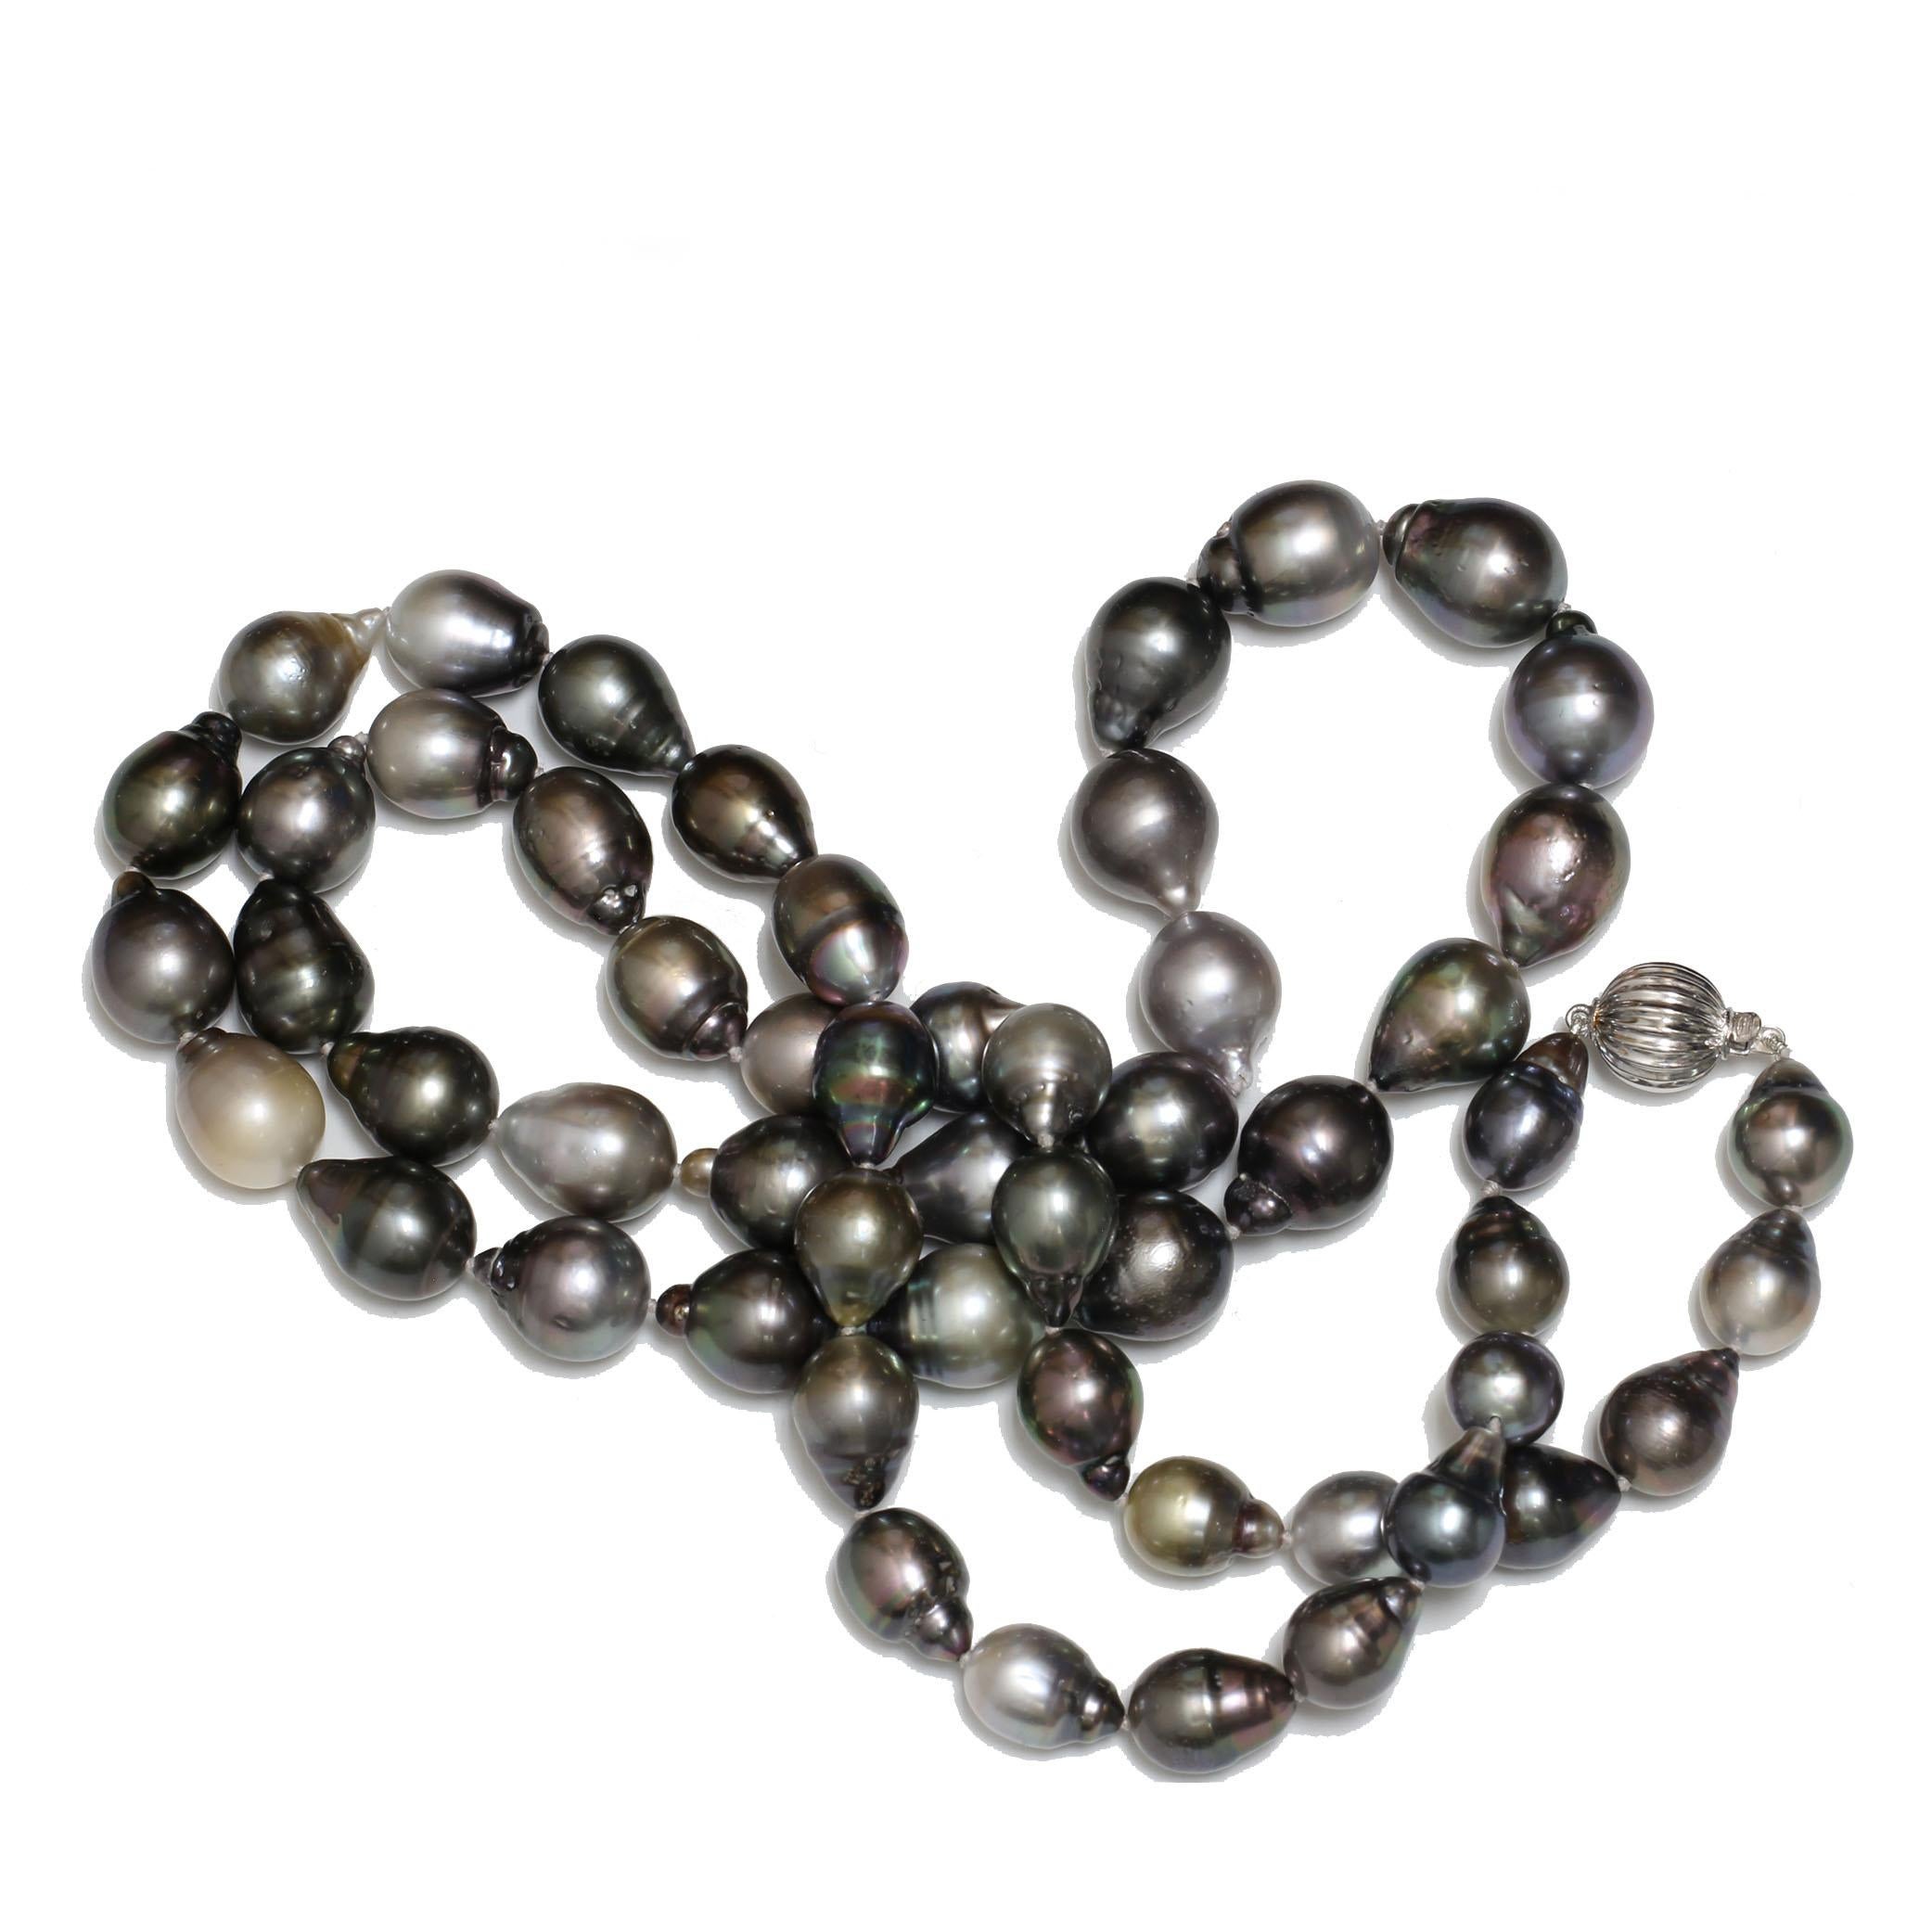 

Tahitian opera length pearl necklace AAA- in surface clarity with 13 to 10 mm in size. The pearls are natural colors of black with of silver, beige, gray with blue, peacock and green overtones. The length is 34